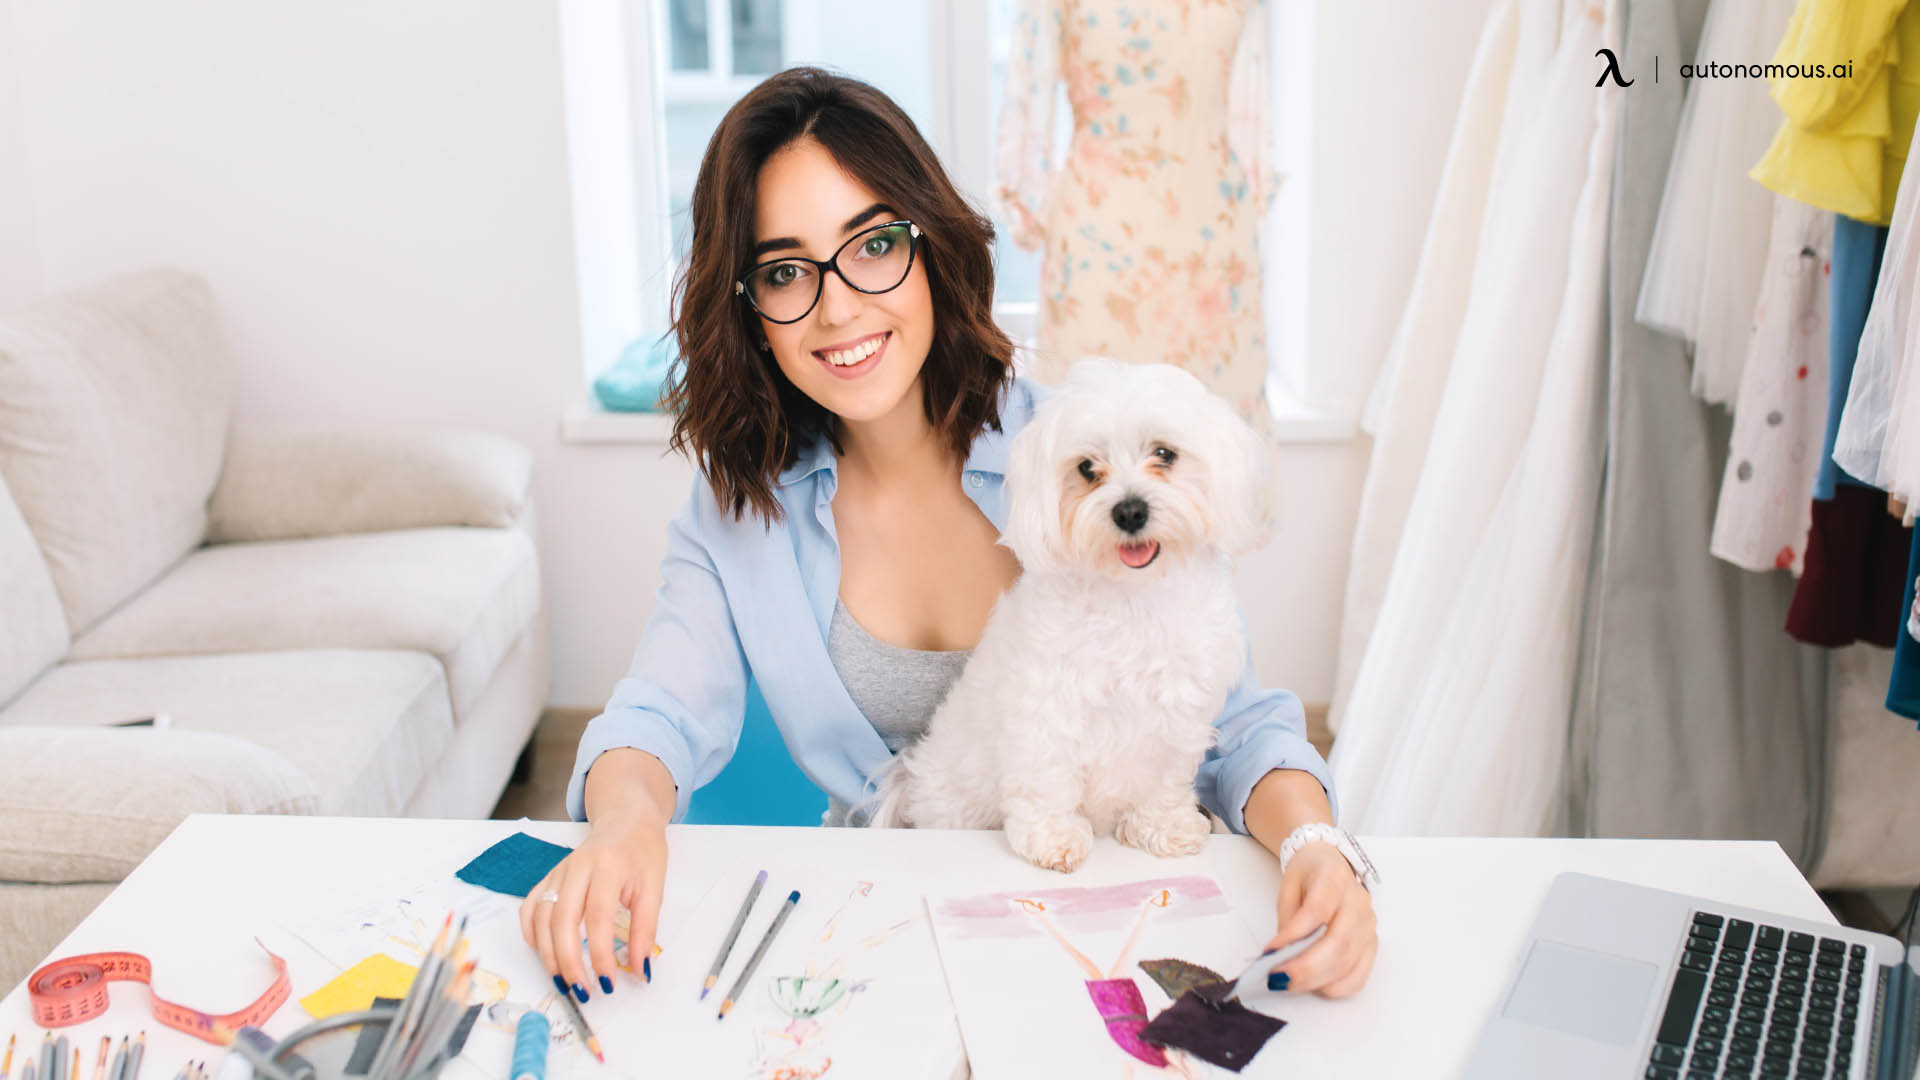 The Pet-Friendly Office Trend: Motivation or Distraction?